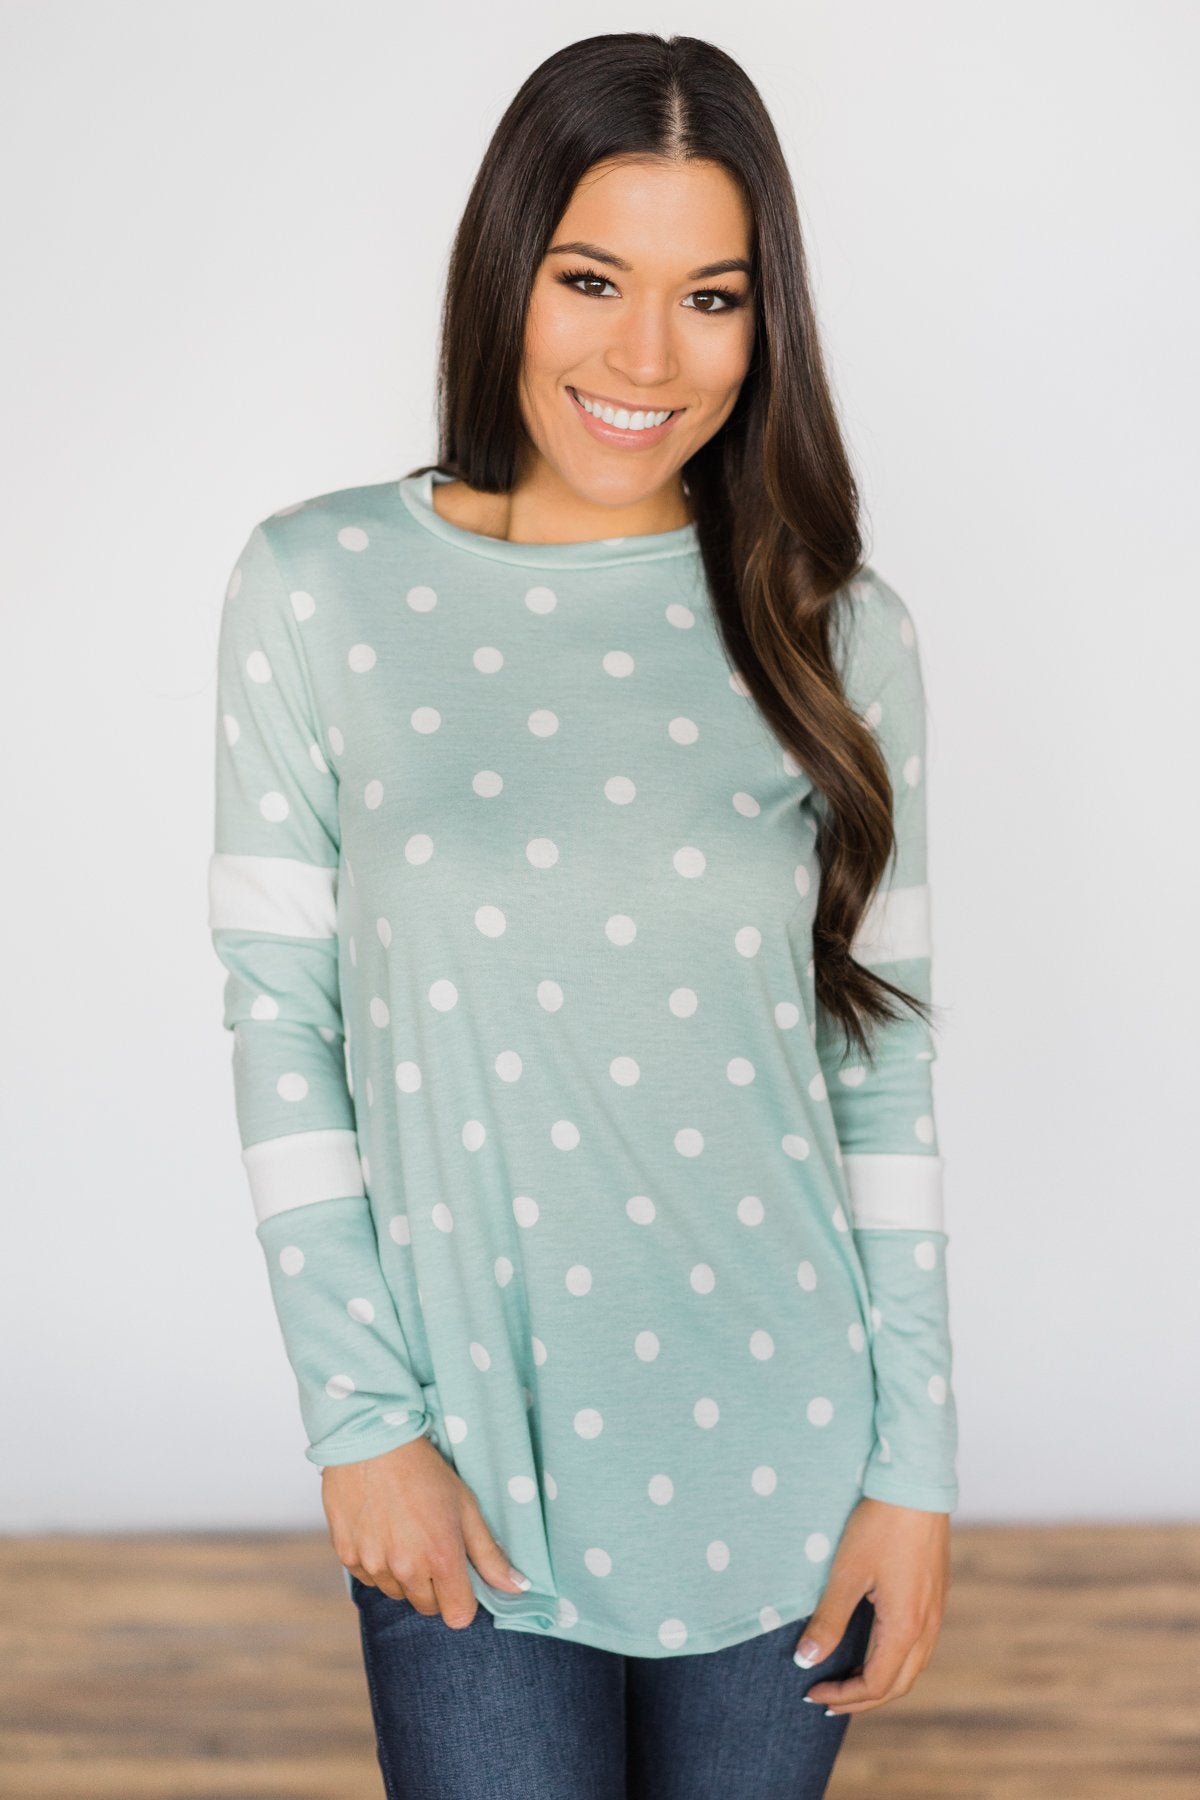 My Happy Place Top ~ Mint